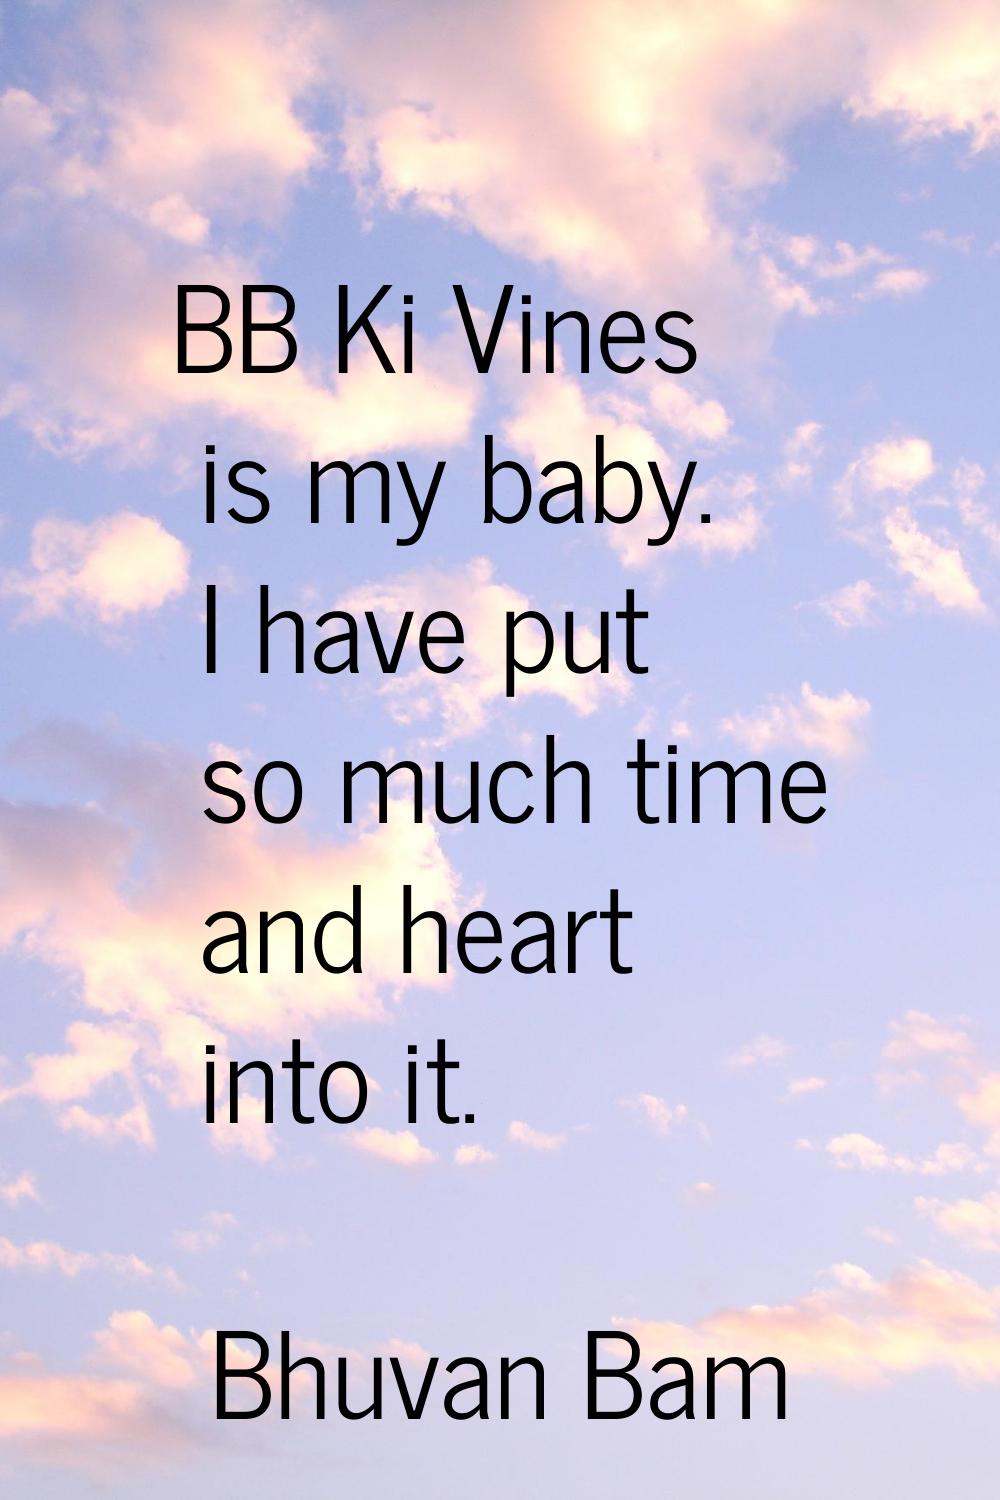 BB Ki Vines is my baby. I have put so much time and heart into it.